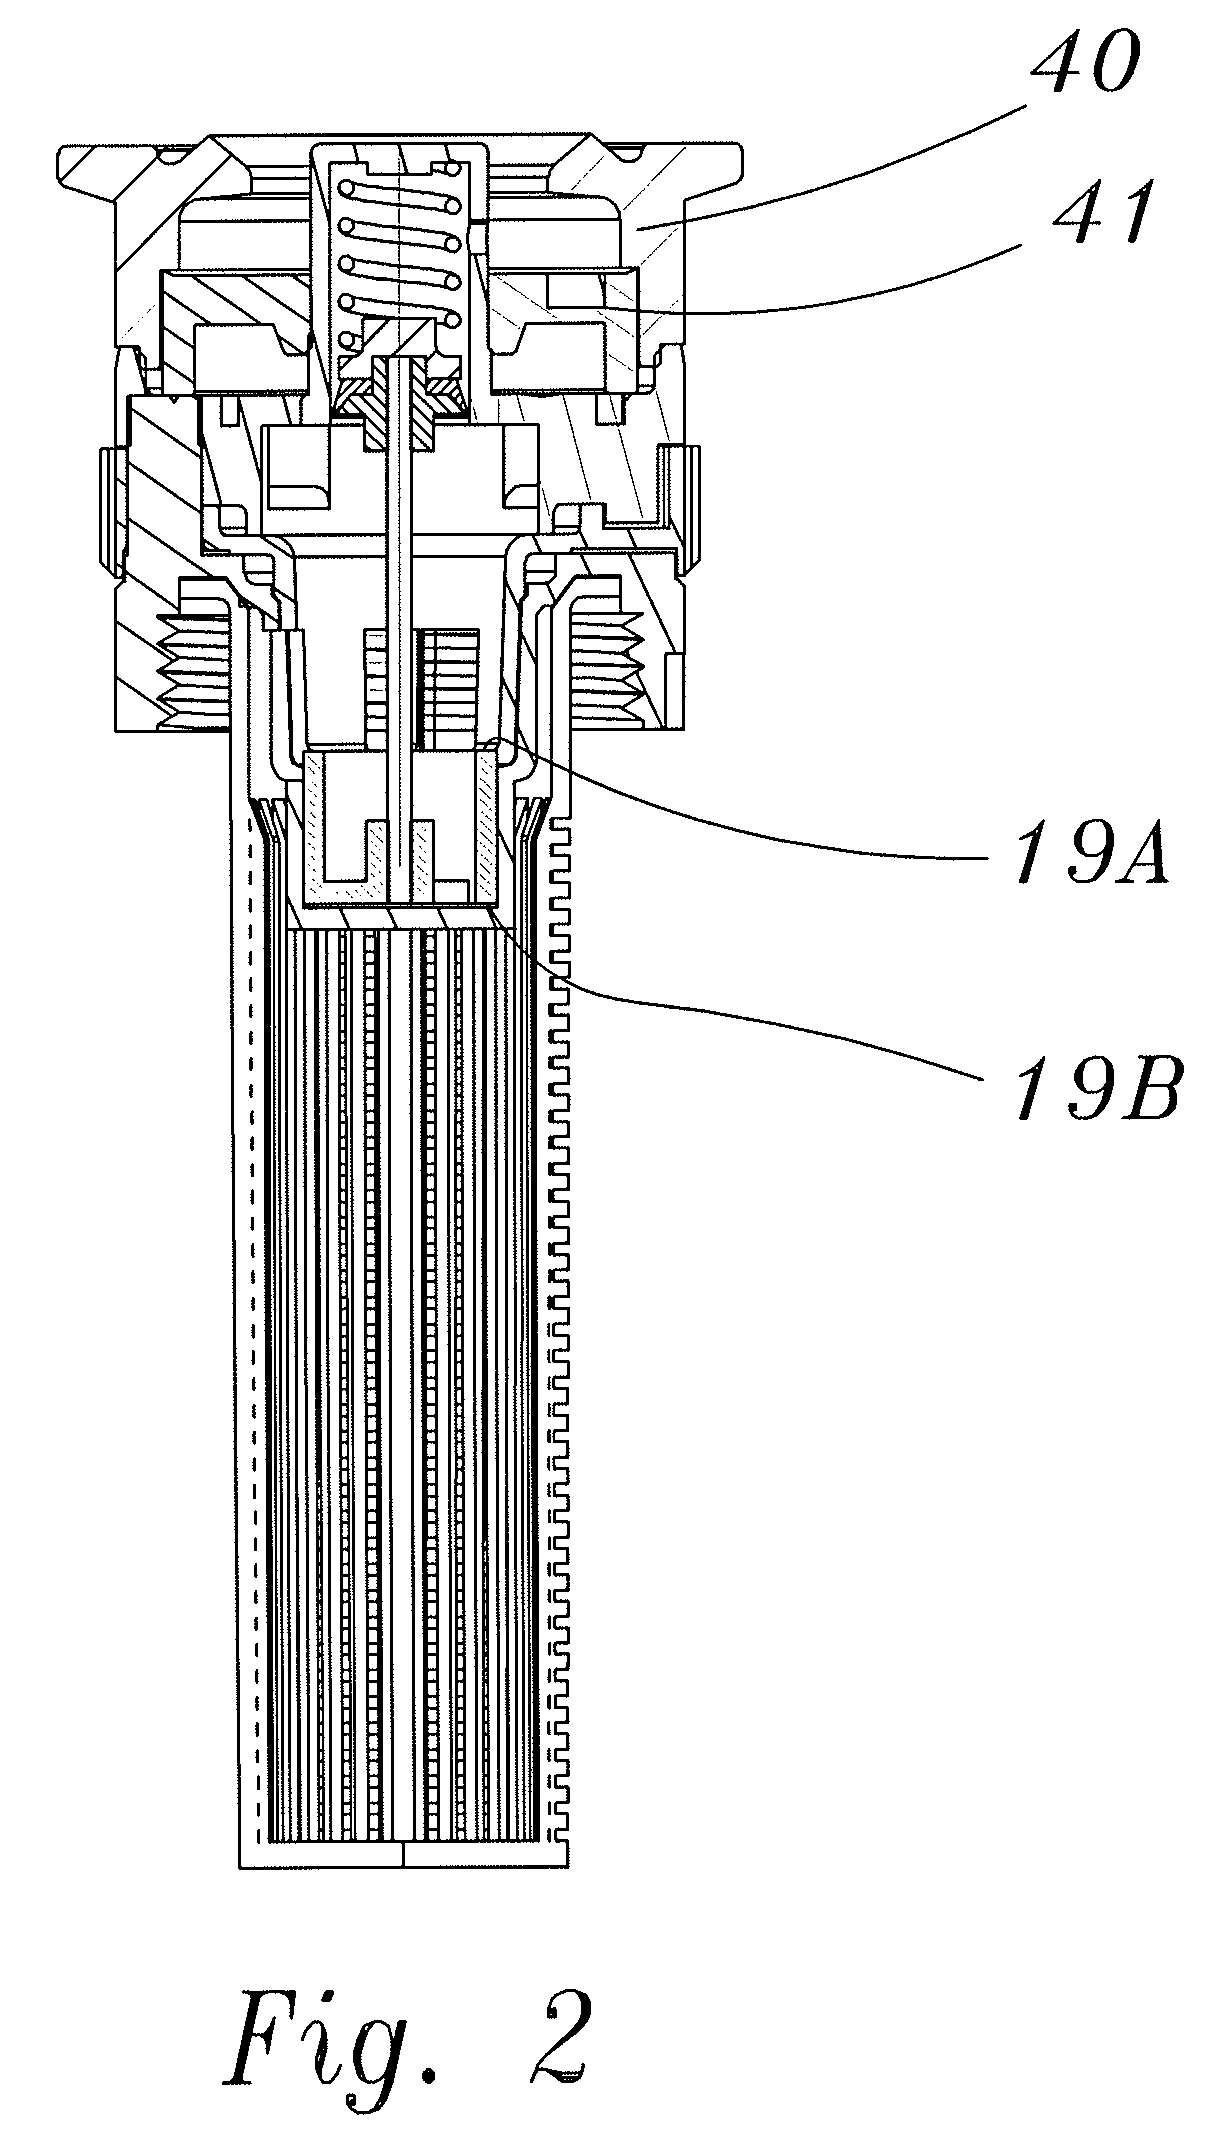 Pressure regulating nozzle assembly with flow control ring